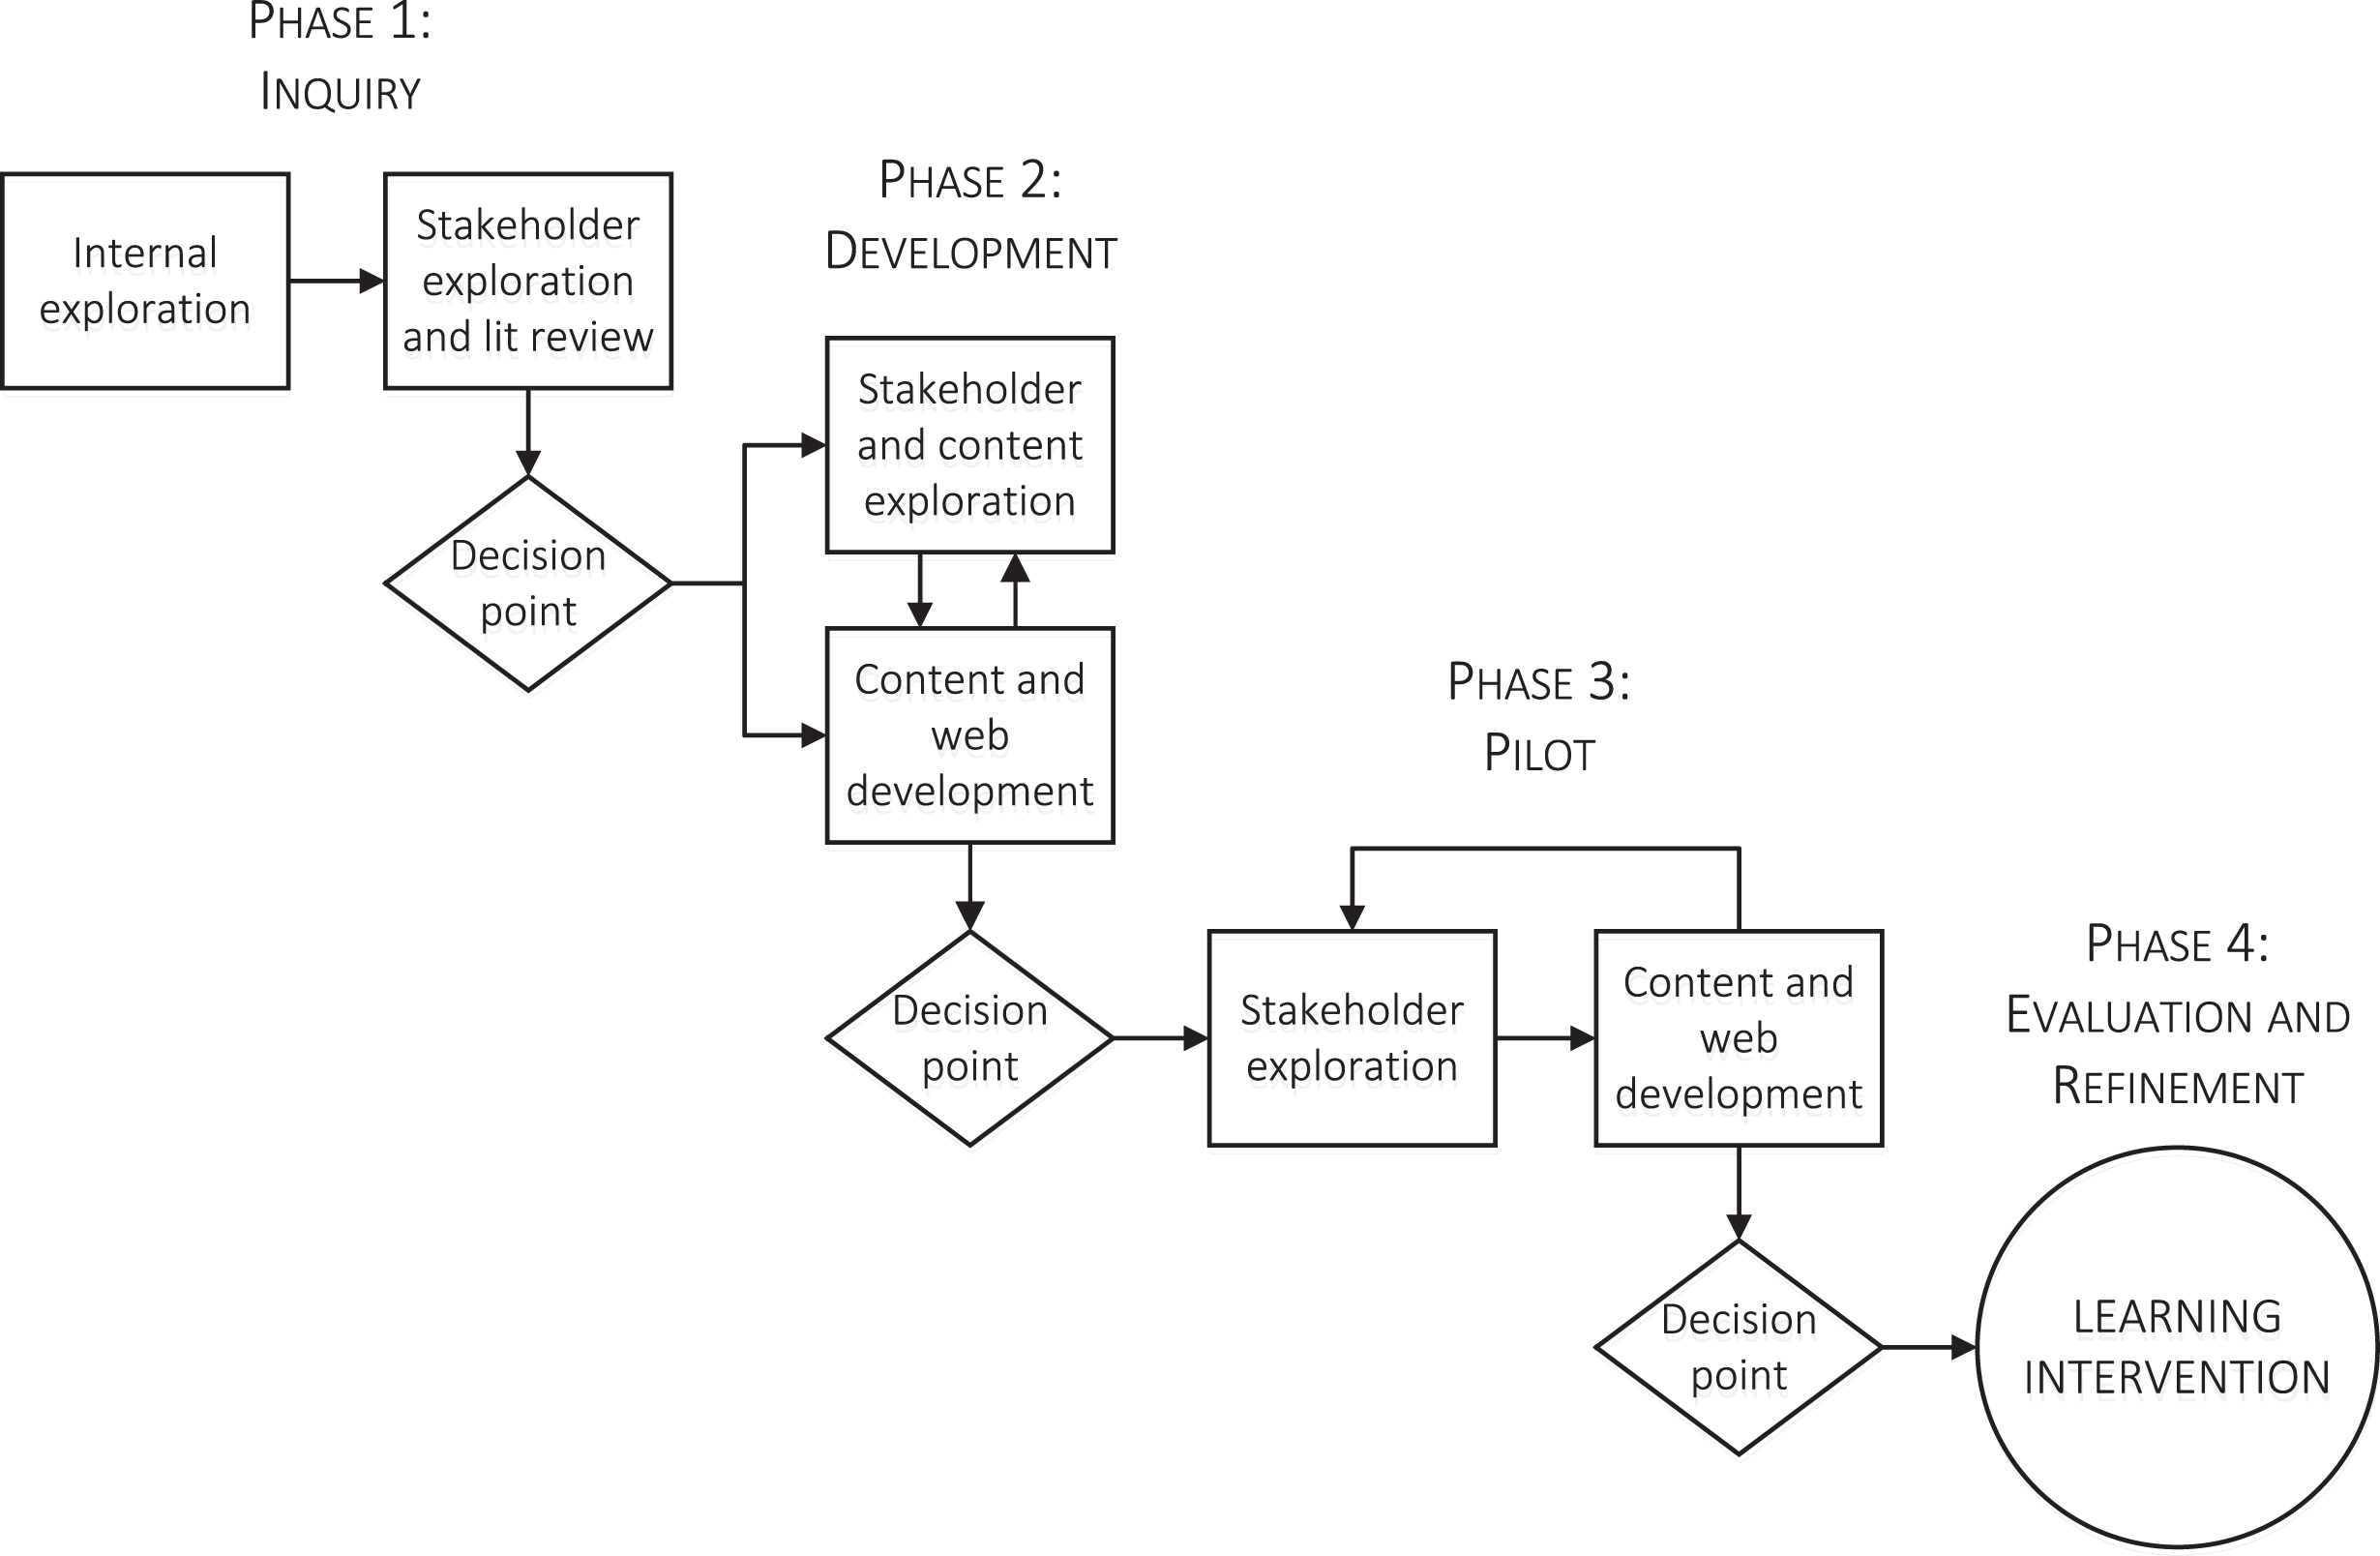 The phases, processes, and decision points of the Diversity Partners intervention development.